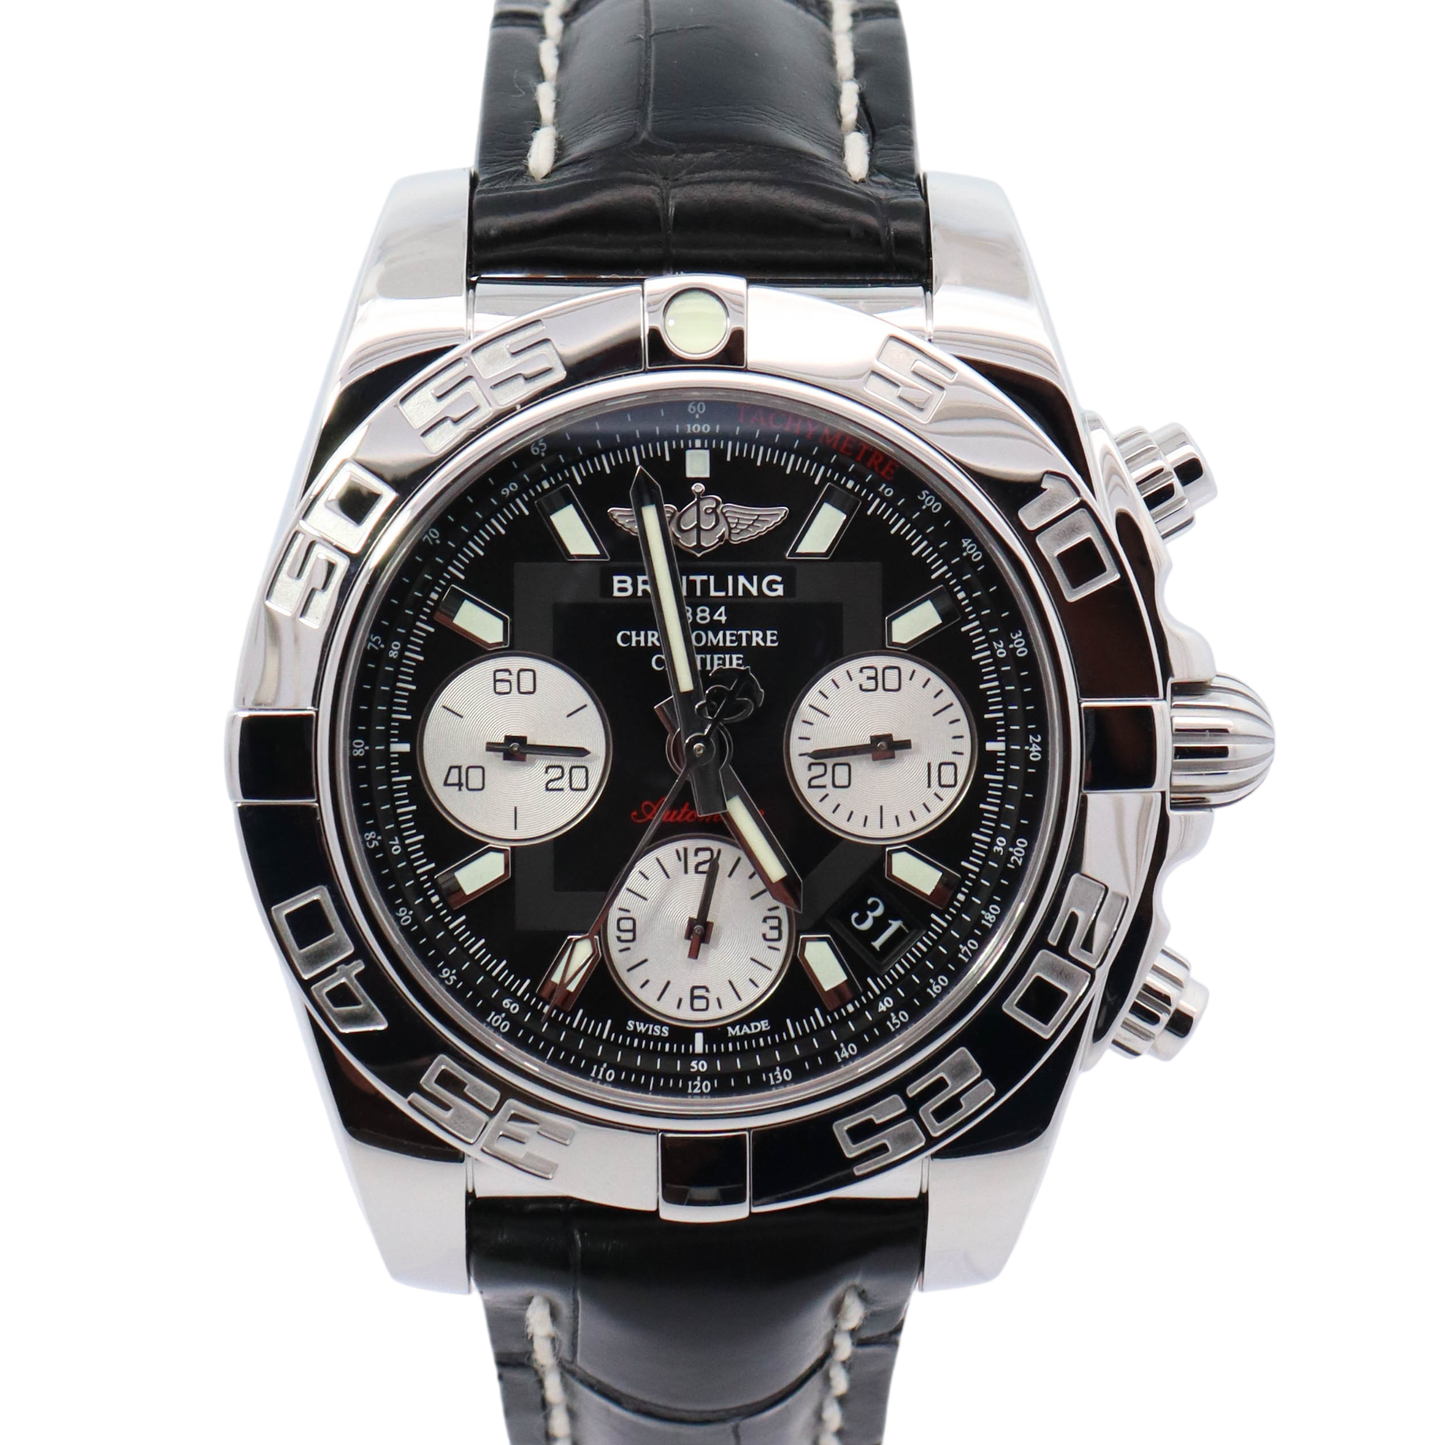 Breitling Chronomat 41mm Stainless Steel Black Chronograph Dial Watch Reference# AB0140 - Happy Jewelers Fine Jewelry Lifetime Warranty